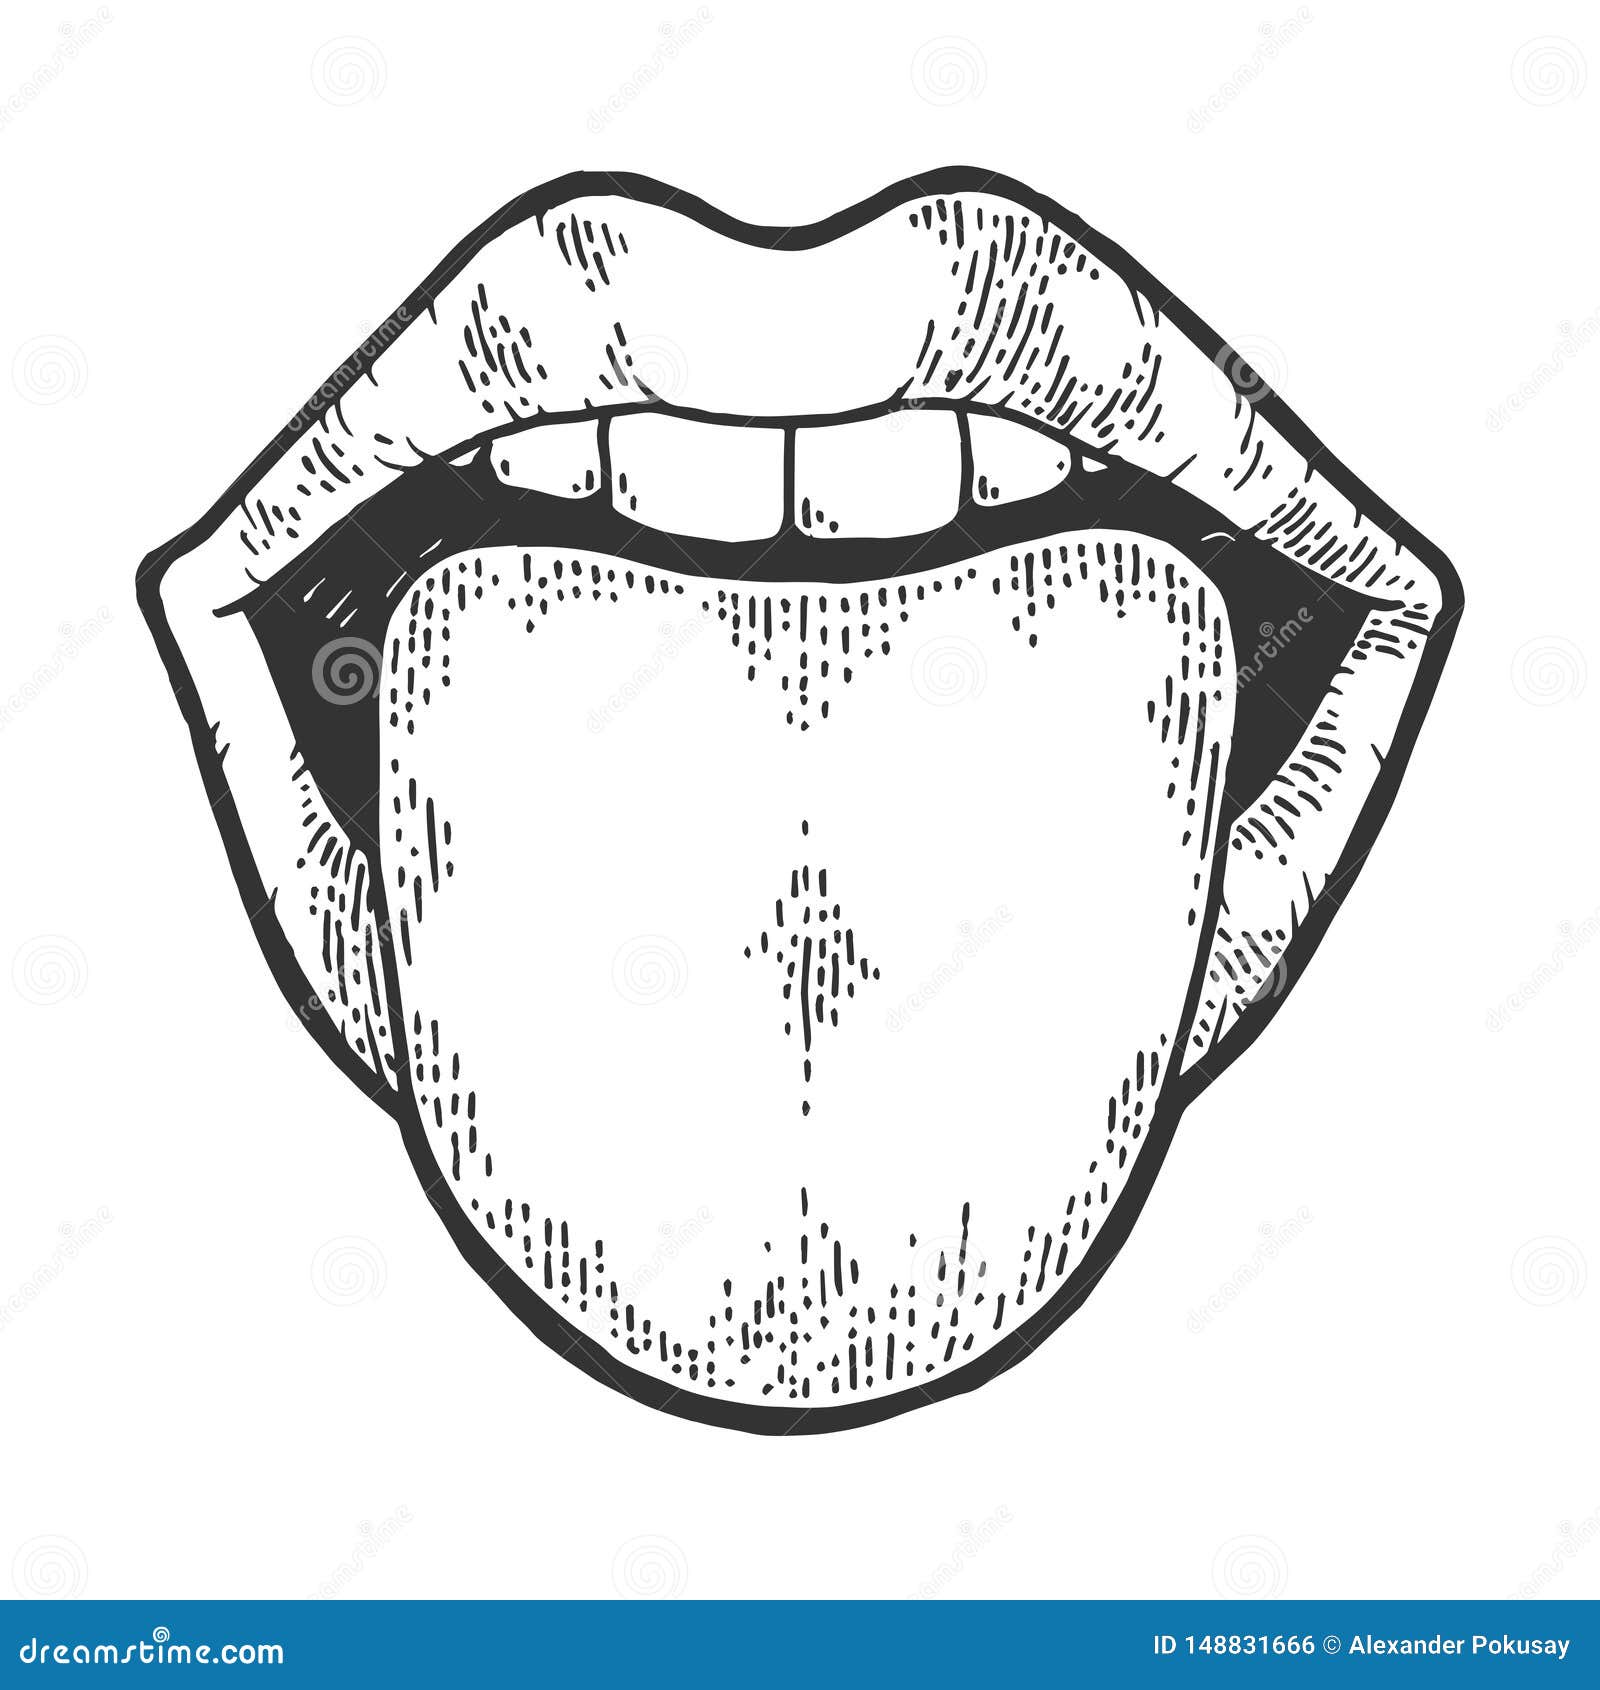 Tongue and Lips Drawing by Boreal Arte - Pixels